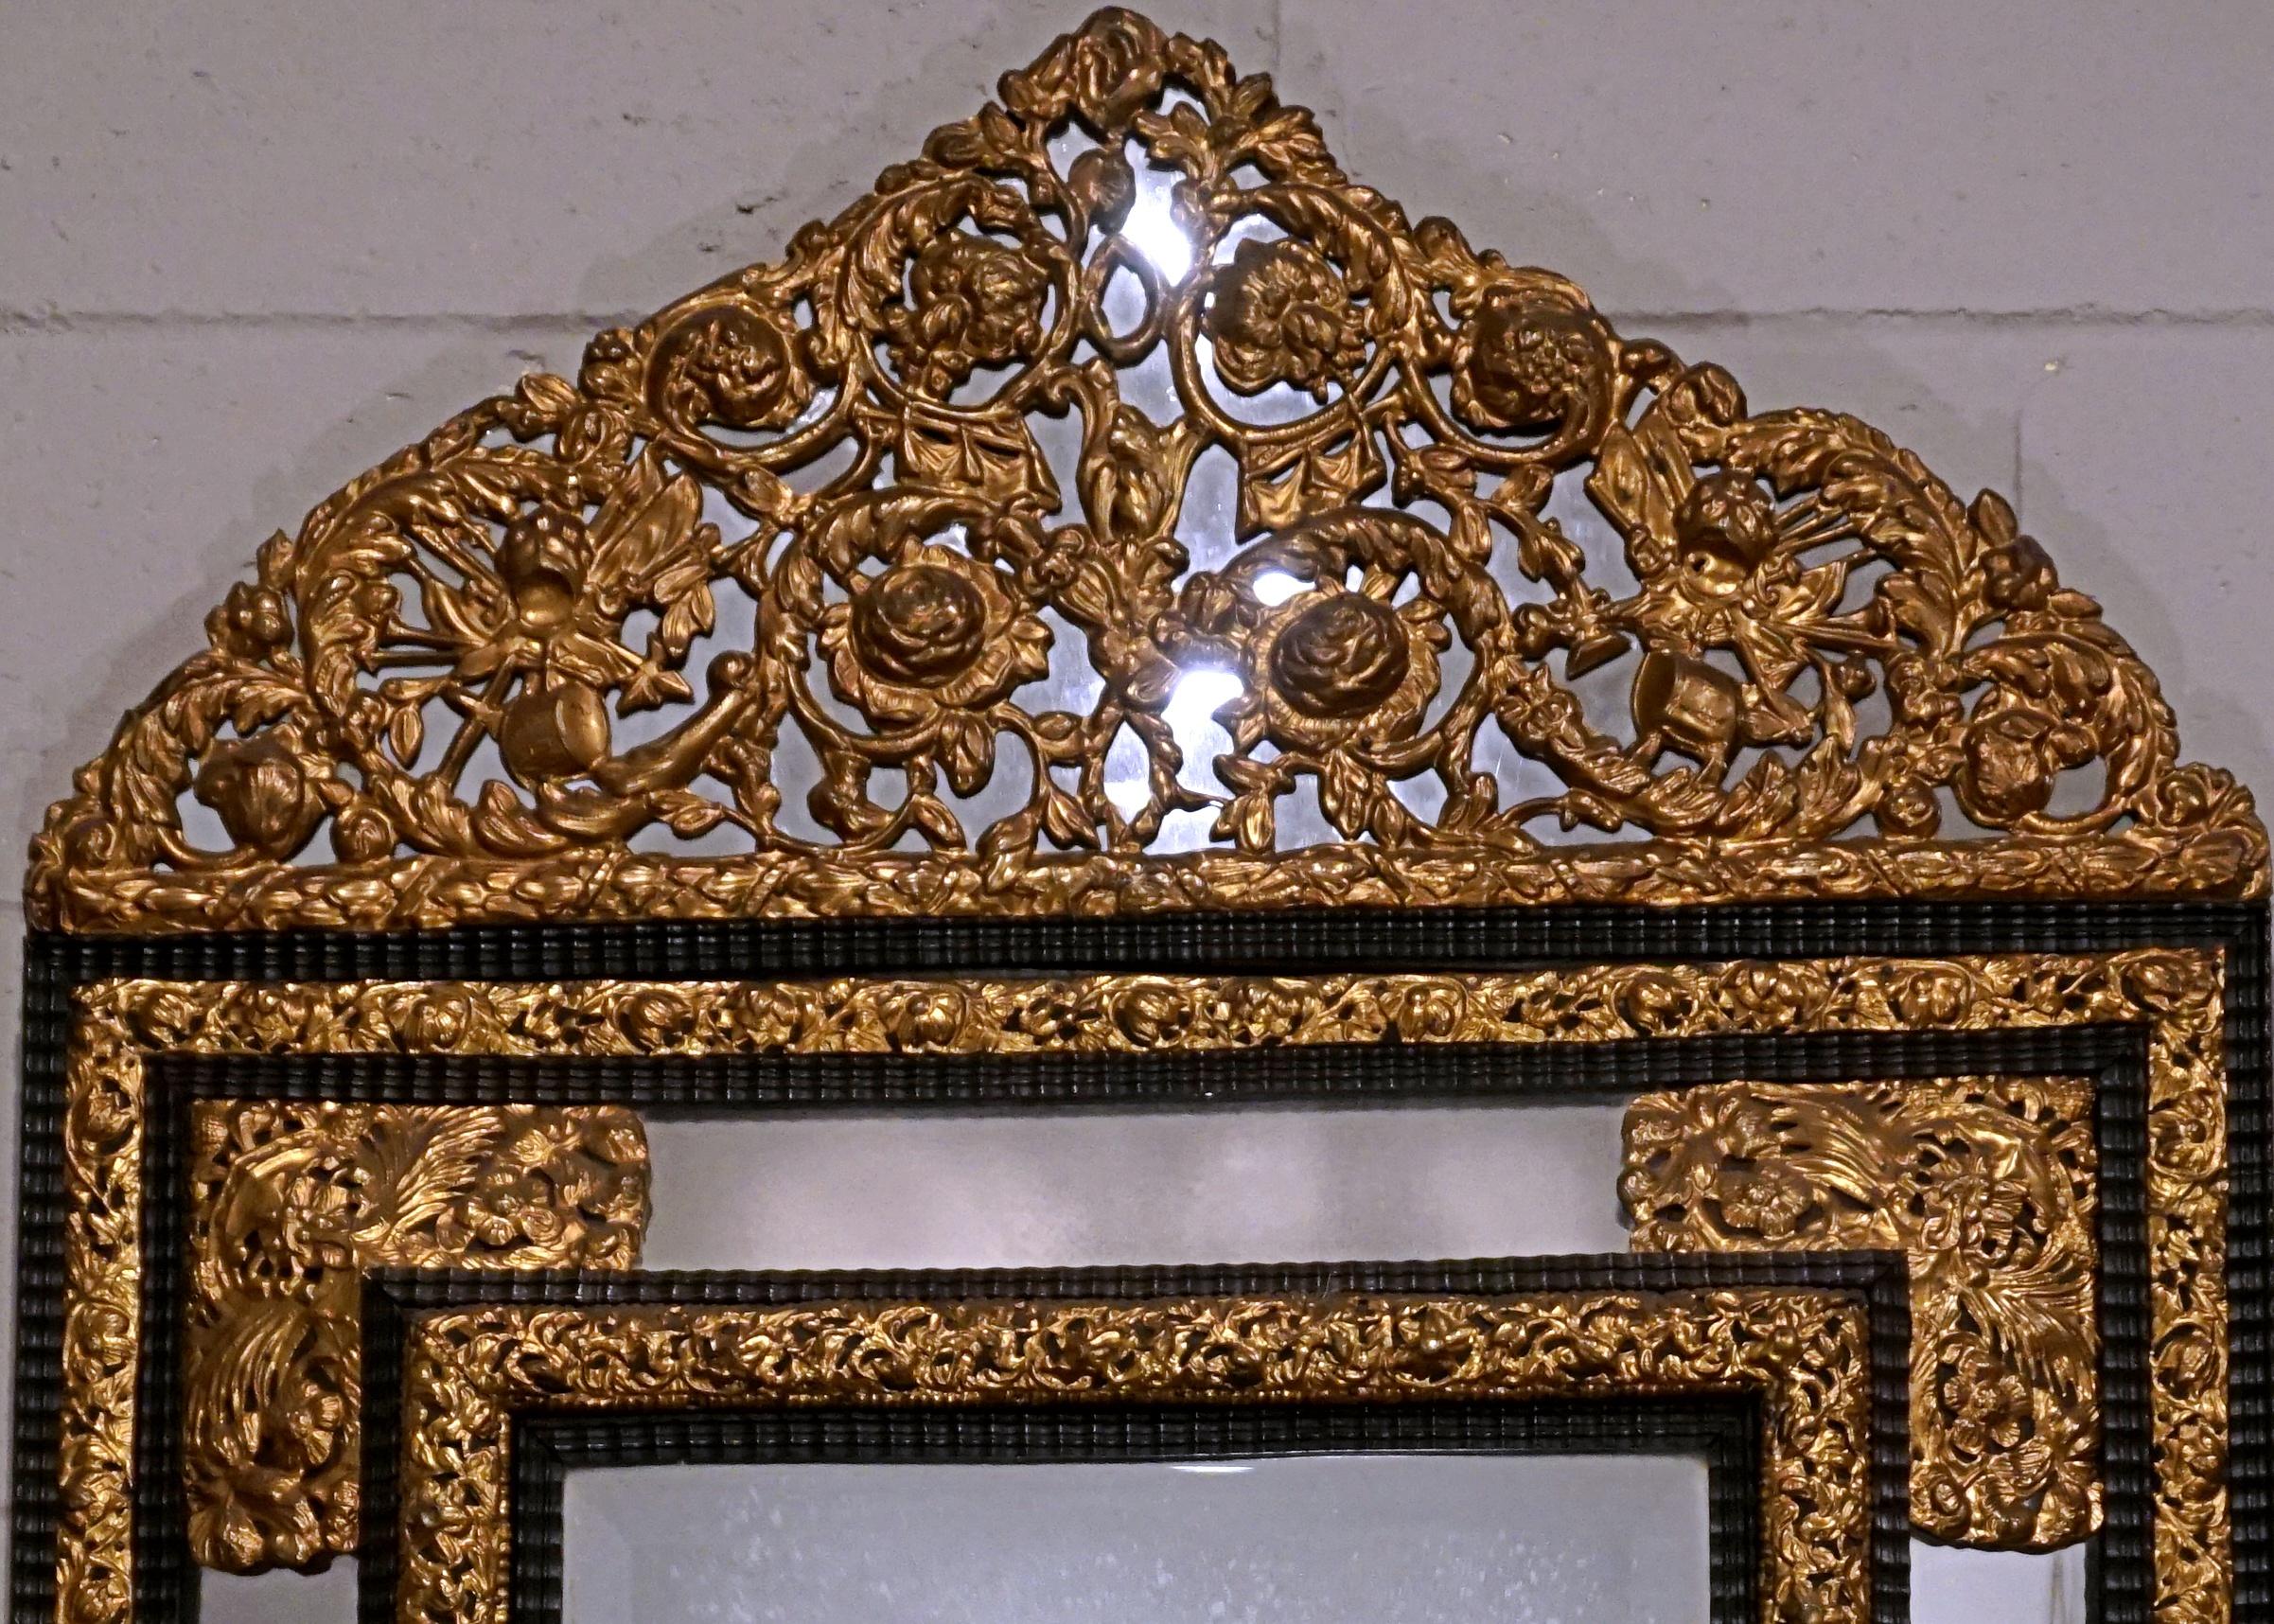 19th century French Repusee mirror, matte finish for photo purposes only.